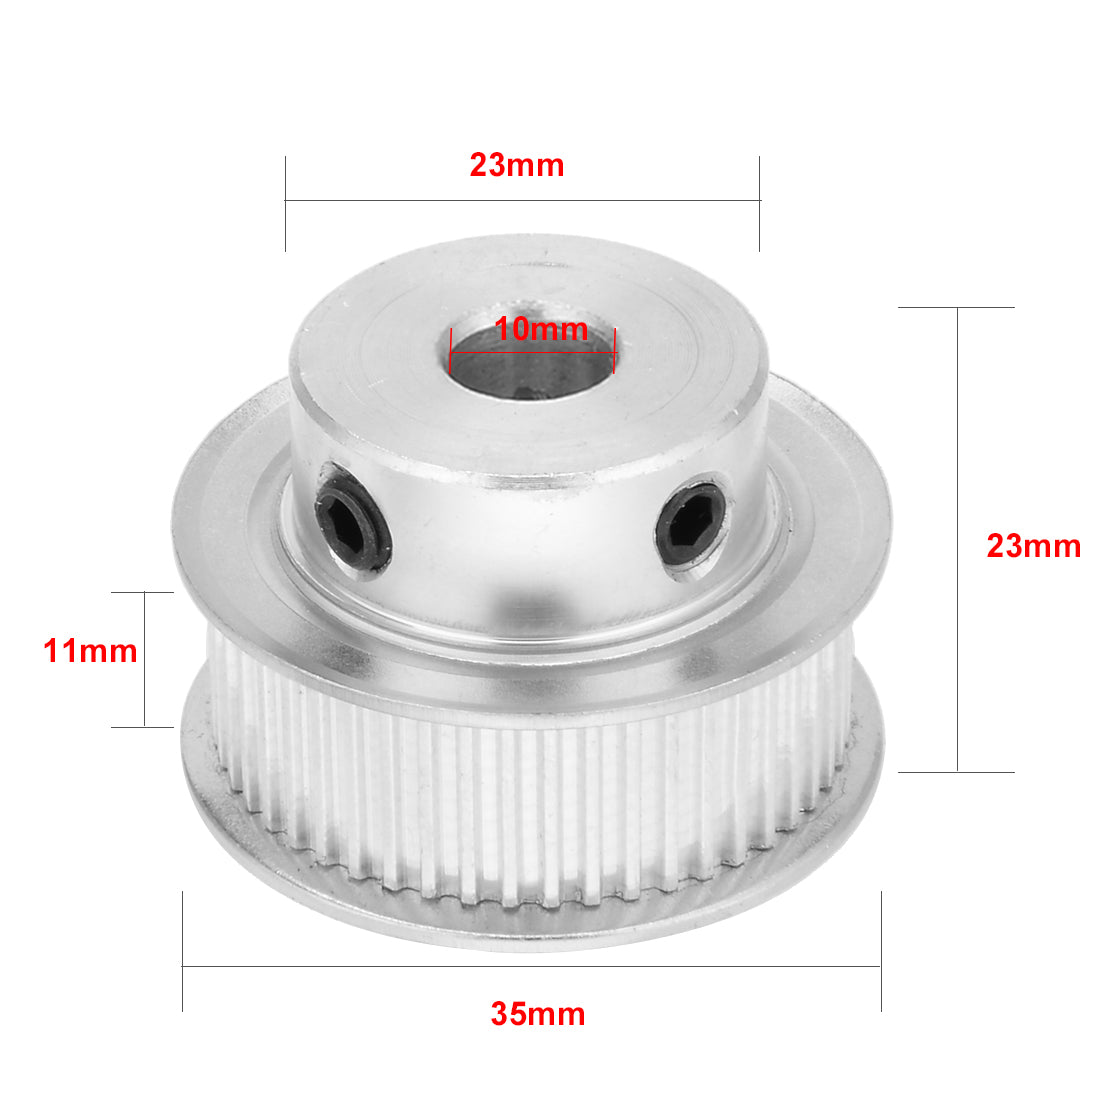 uxcell Uxcell Aluminum M-X-L 50 Teeth 10mm Bore Timing Belt Idler Pulley Synchronous Wheel 10mm Belt for 3D Printer CNC